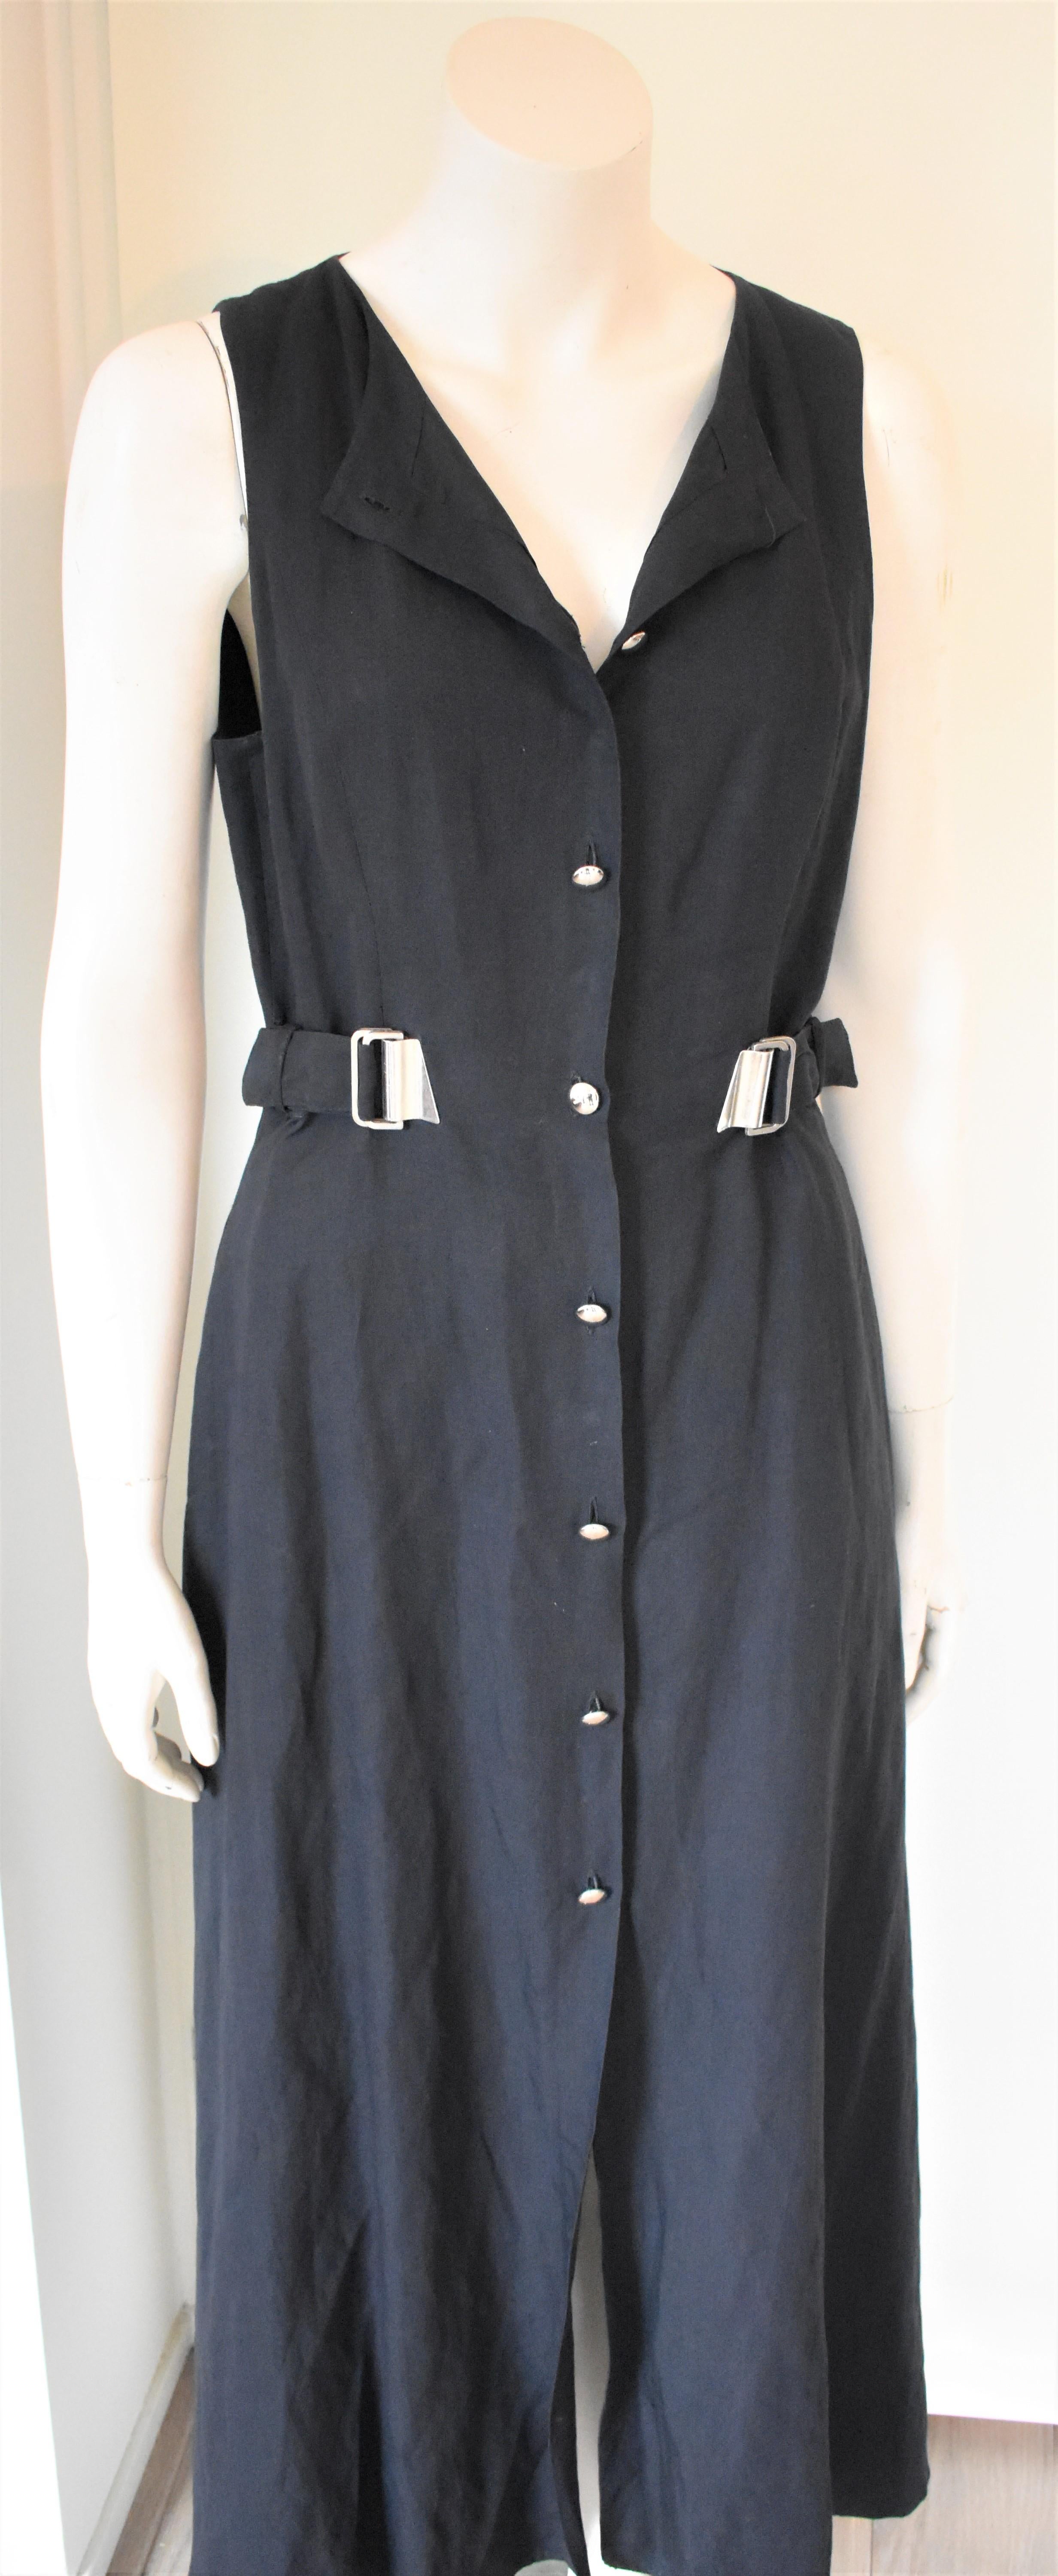 State of Claude Montana Vintage Black Dress 1990's For Sale 4